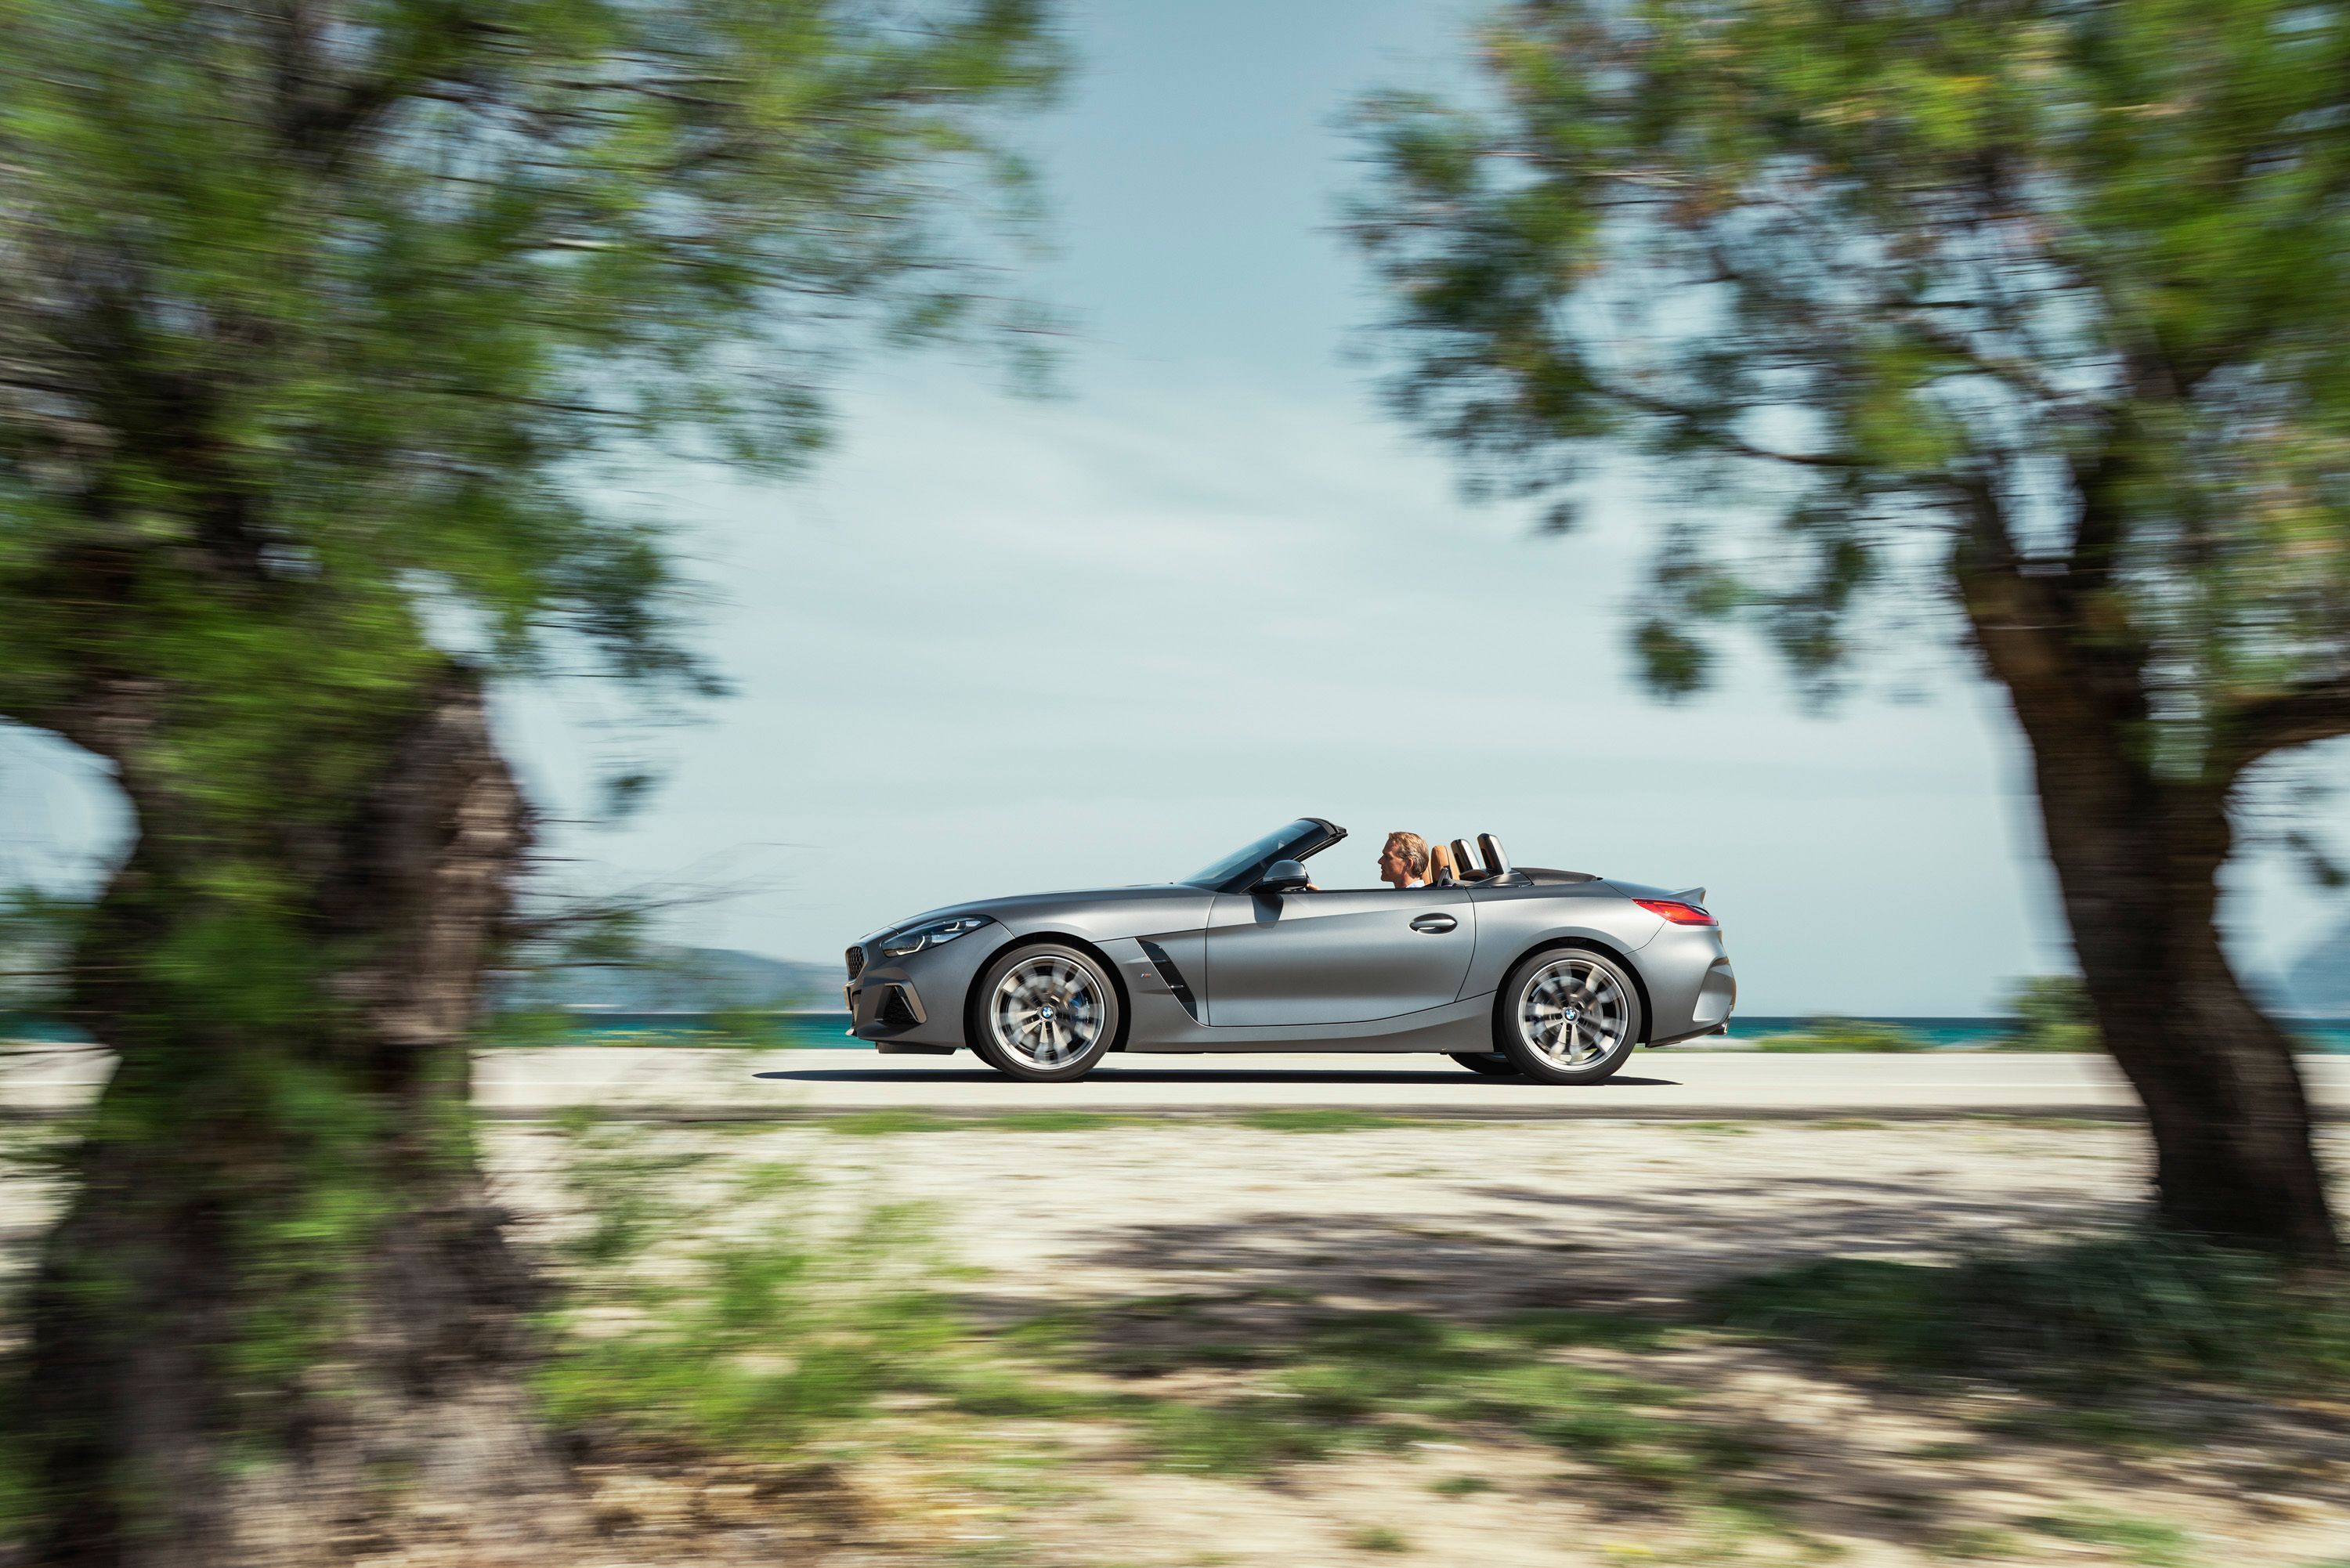 2019 Wallpaper of the Day: 2019 BMW Z4